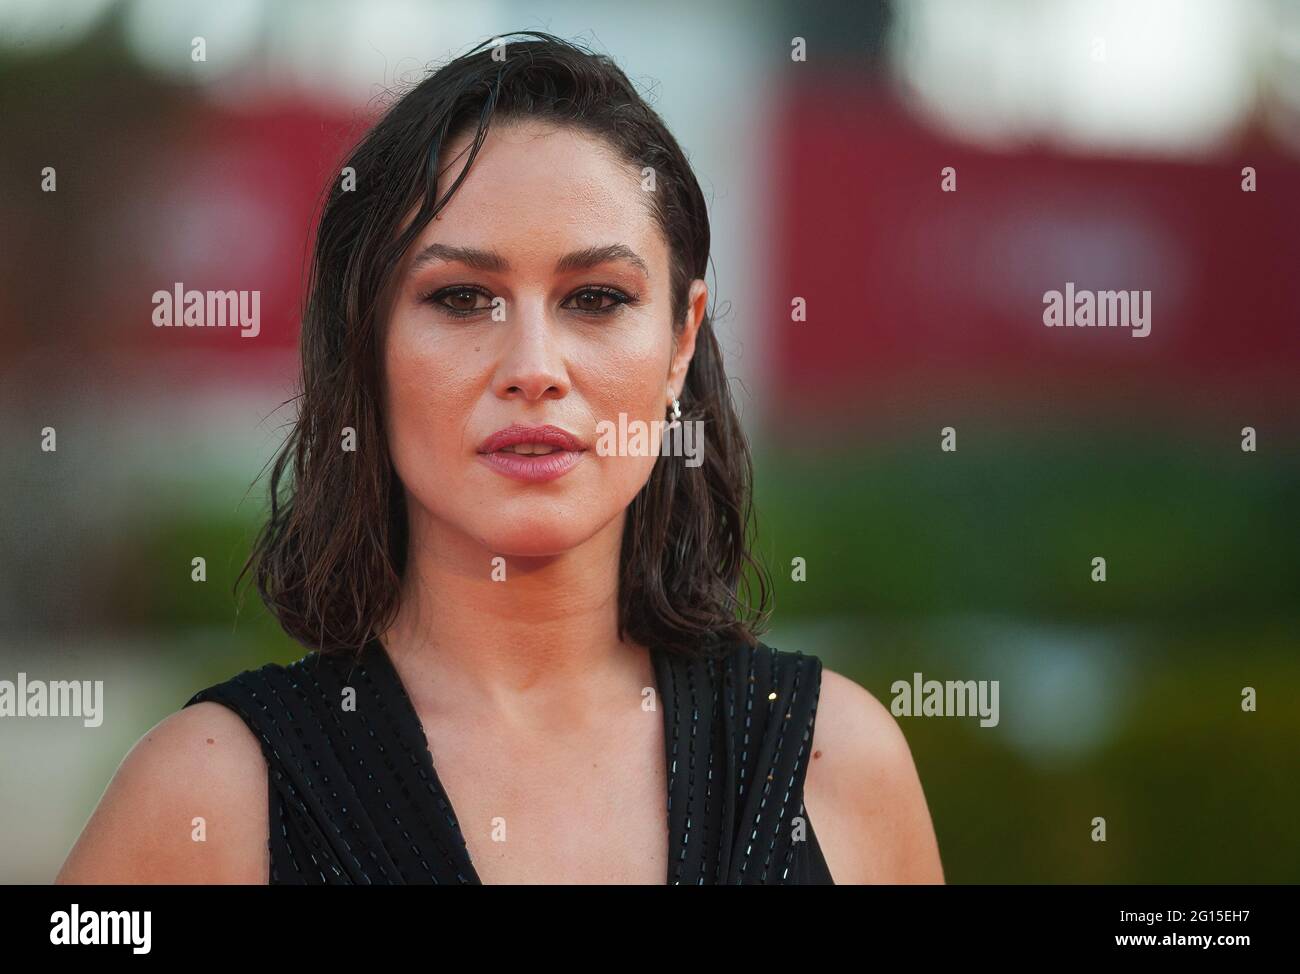 Malaga, Spain. 04th June, 2021. Spanish actress, Aida Folch poses for photographers at the red carpet inside Miramar Hotel. The new edition of the 24th Malaga Spanish Film Festival, great cinematographic event, present the films candidates to win the 'Biznaga de Oro' prize, following all measures to prevent the spread of coronavirus and to guarantee a secure event. The festival will be held from 3 to 13 June. Credit: SOPA Images Limited/Alamy Live News Stock Photo